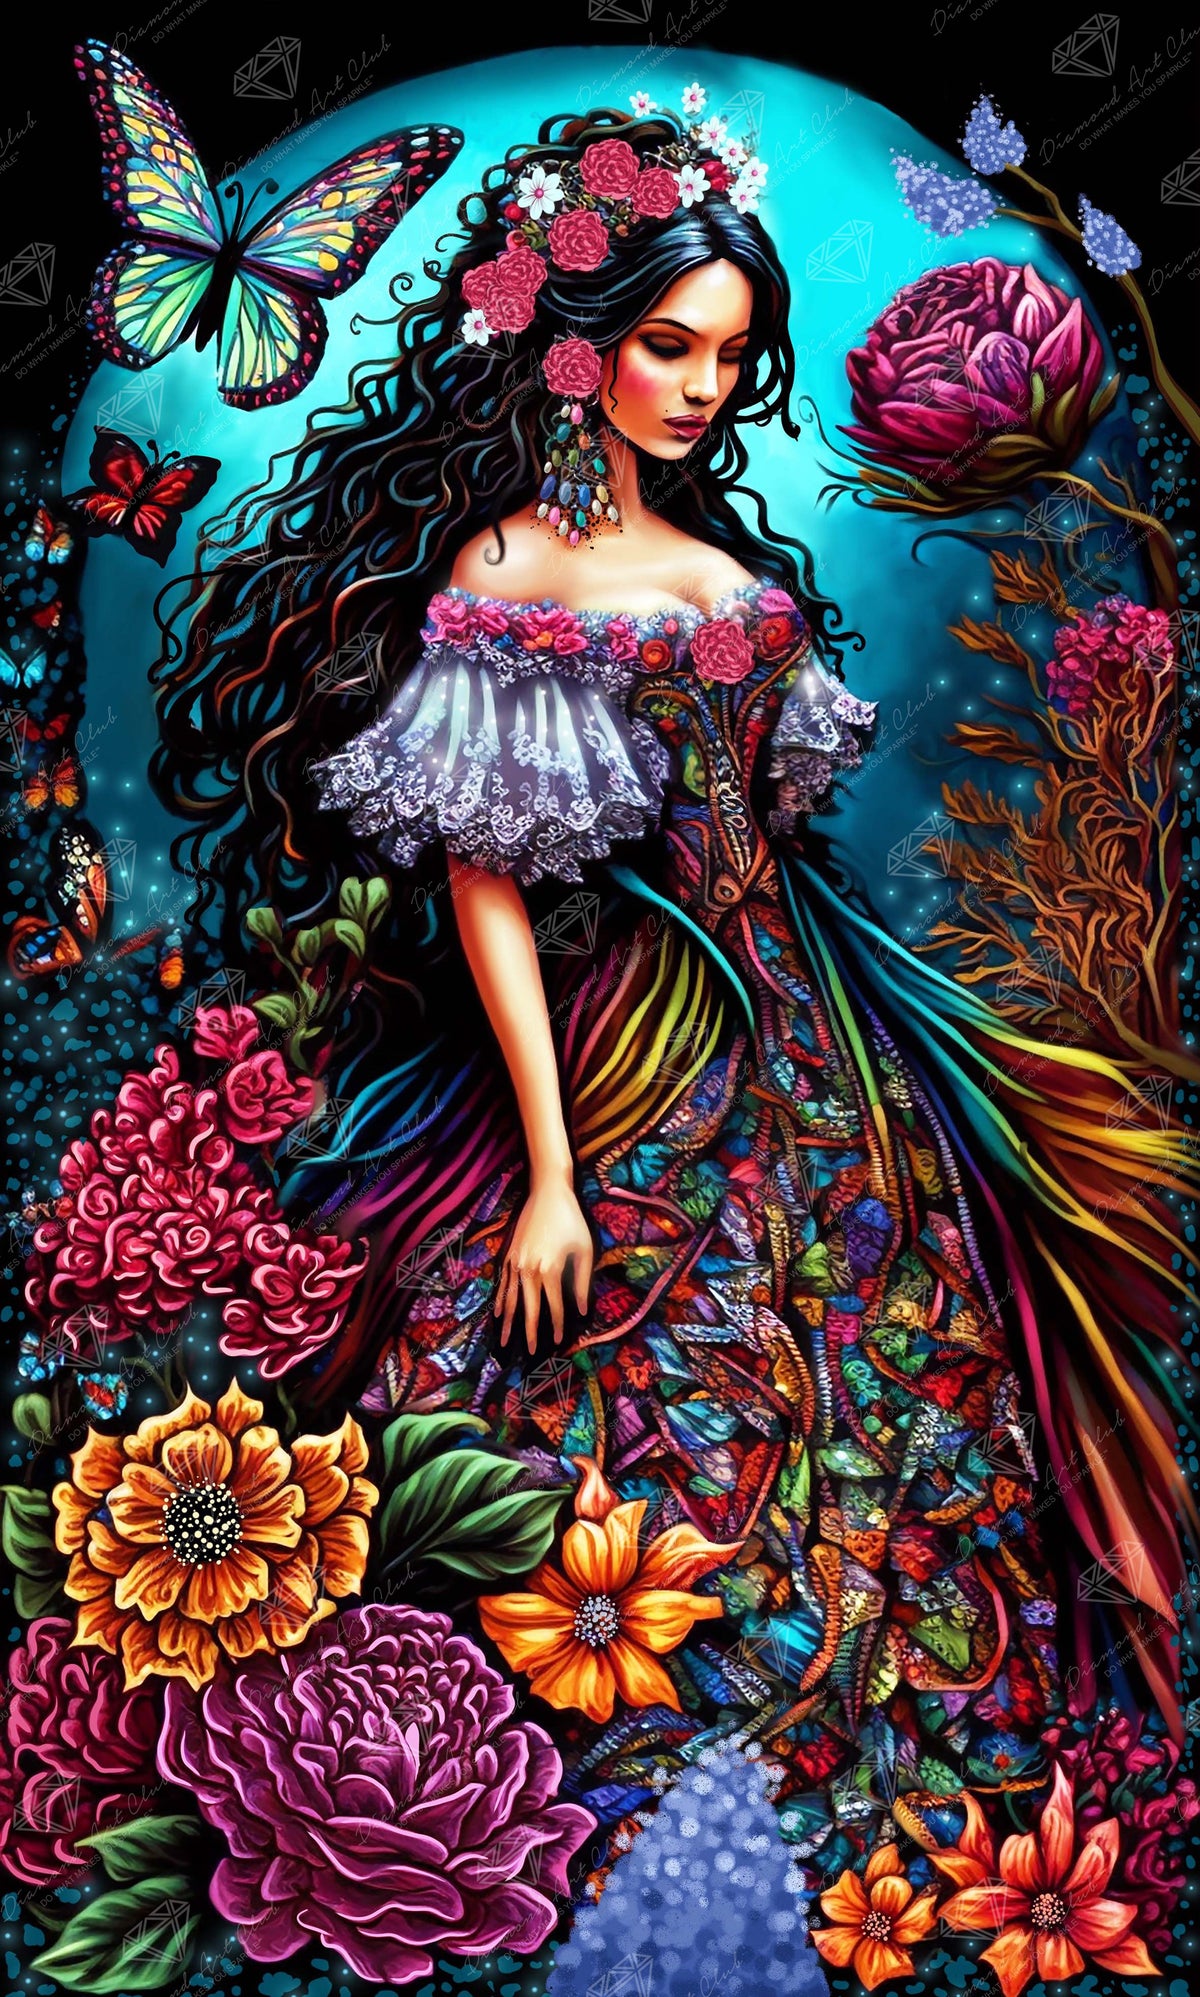 Diamond Painting Esmeralda 23.6" x 39.4" (60cm x 100cm) / Square With 60 Colors Including 3 ABs and 3 Fairy Dust Diamonds / 96,641